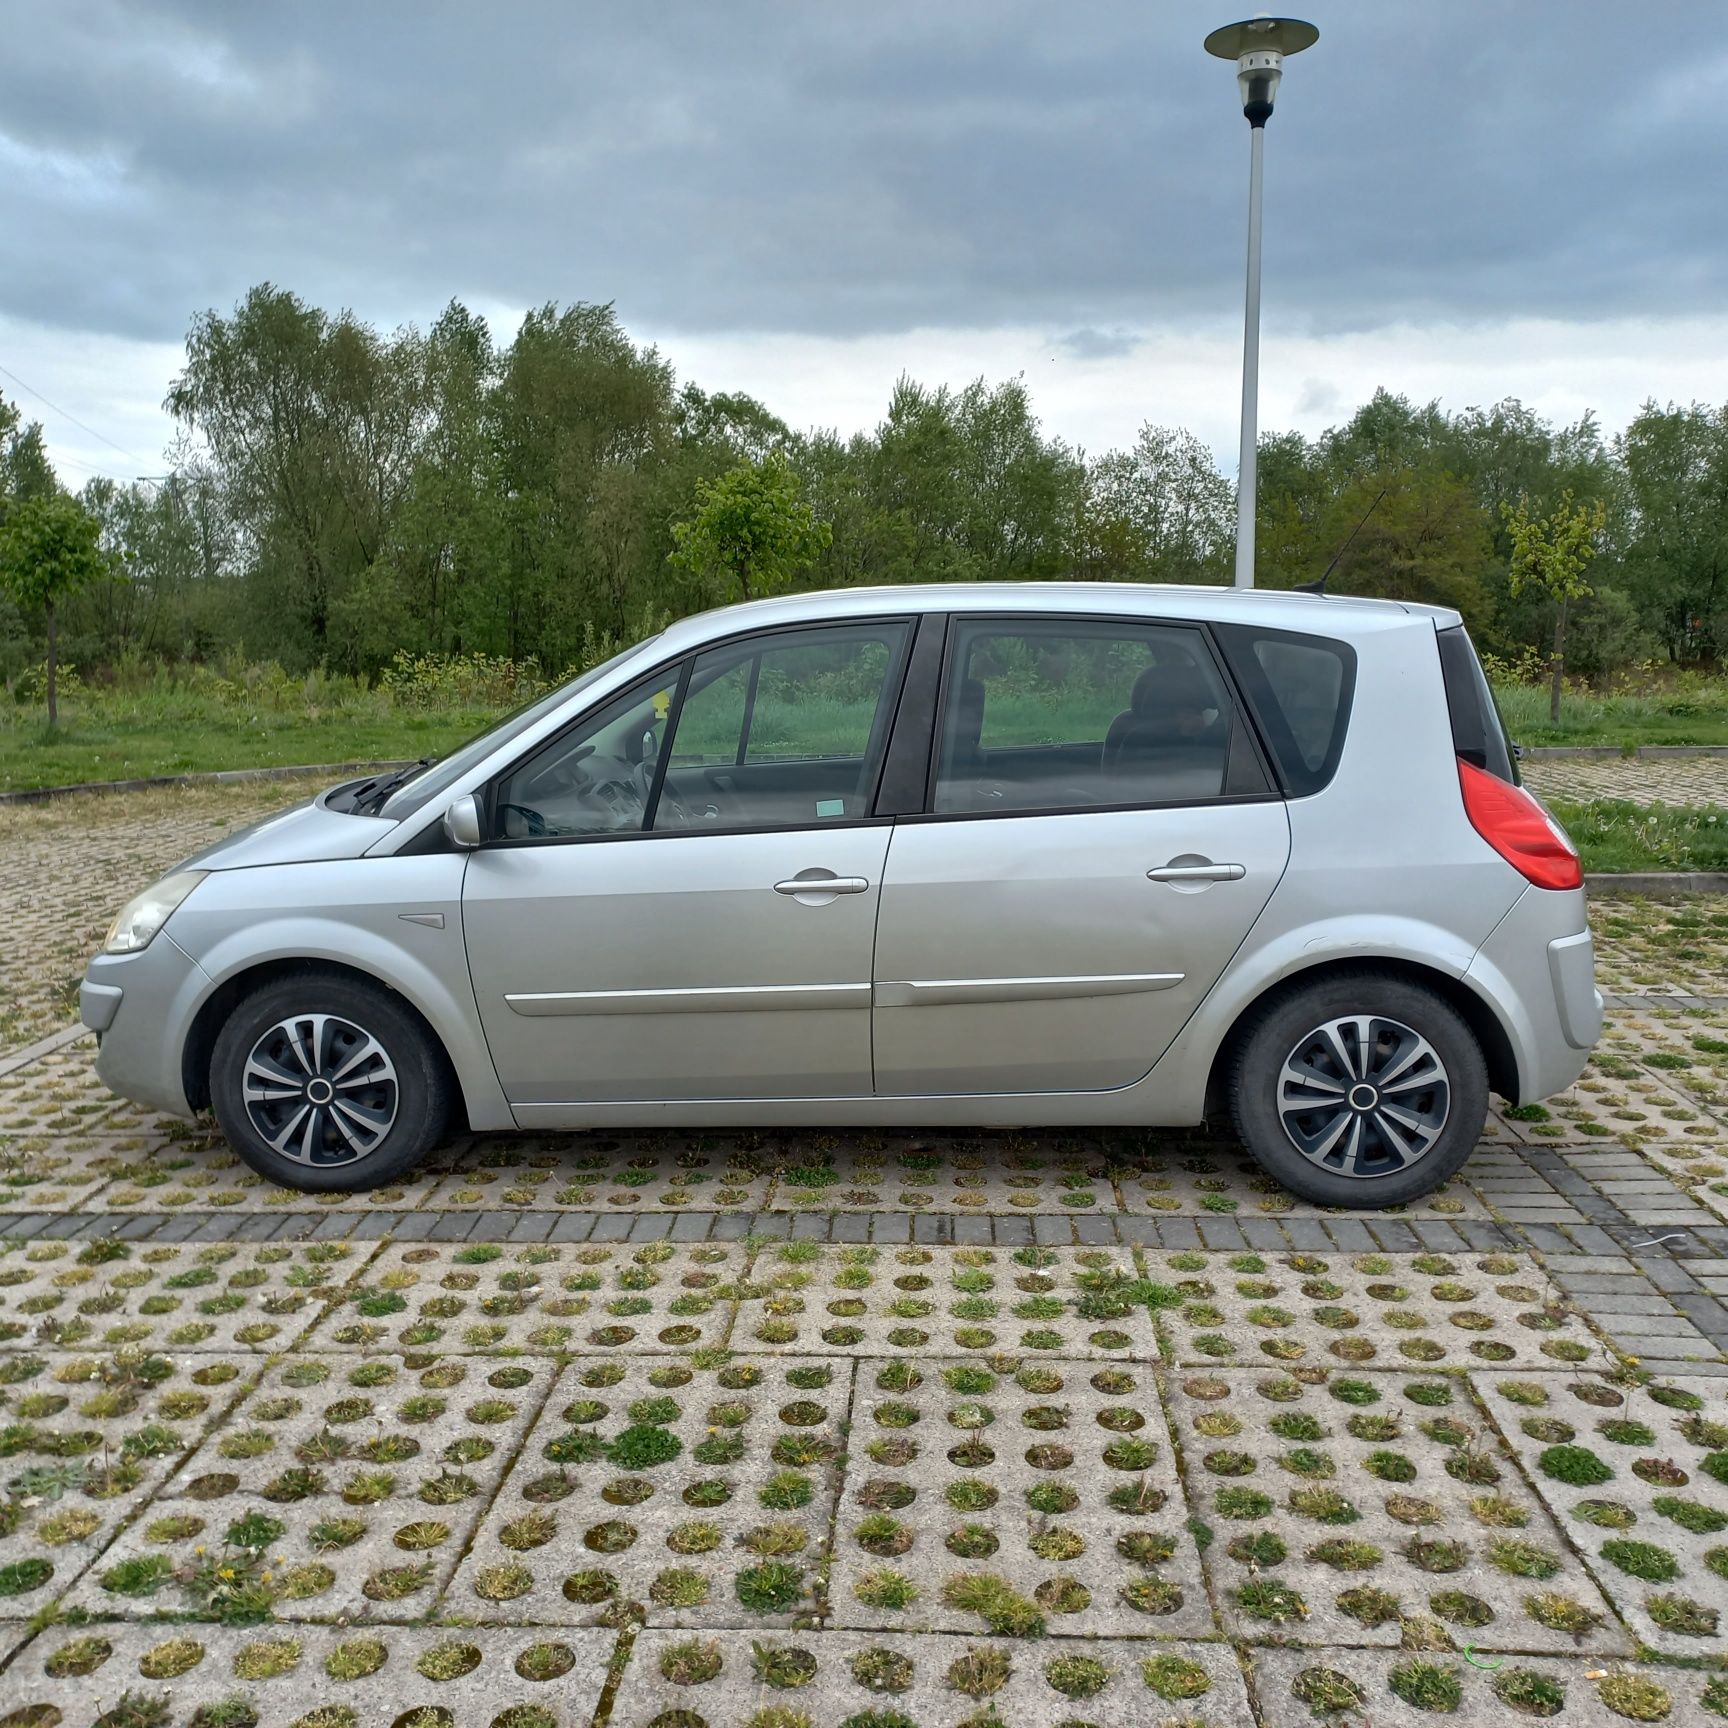 Renault Scenic 1,6 benzyna